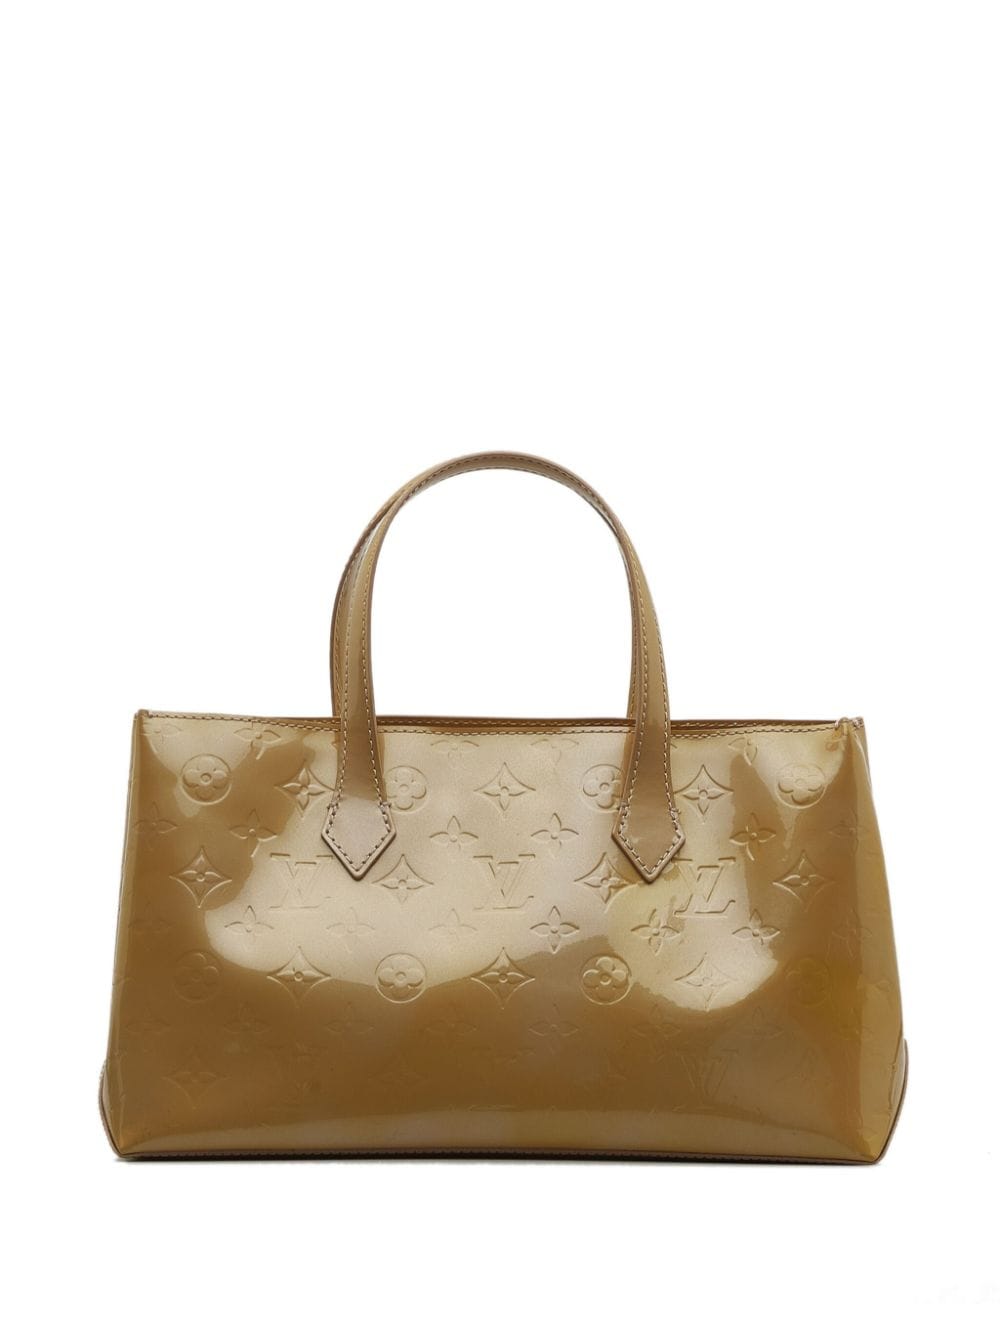 Louis Vuitton 2000 pre-owned Wilshire PM tote bag - Bruin